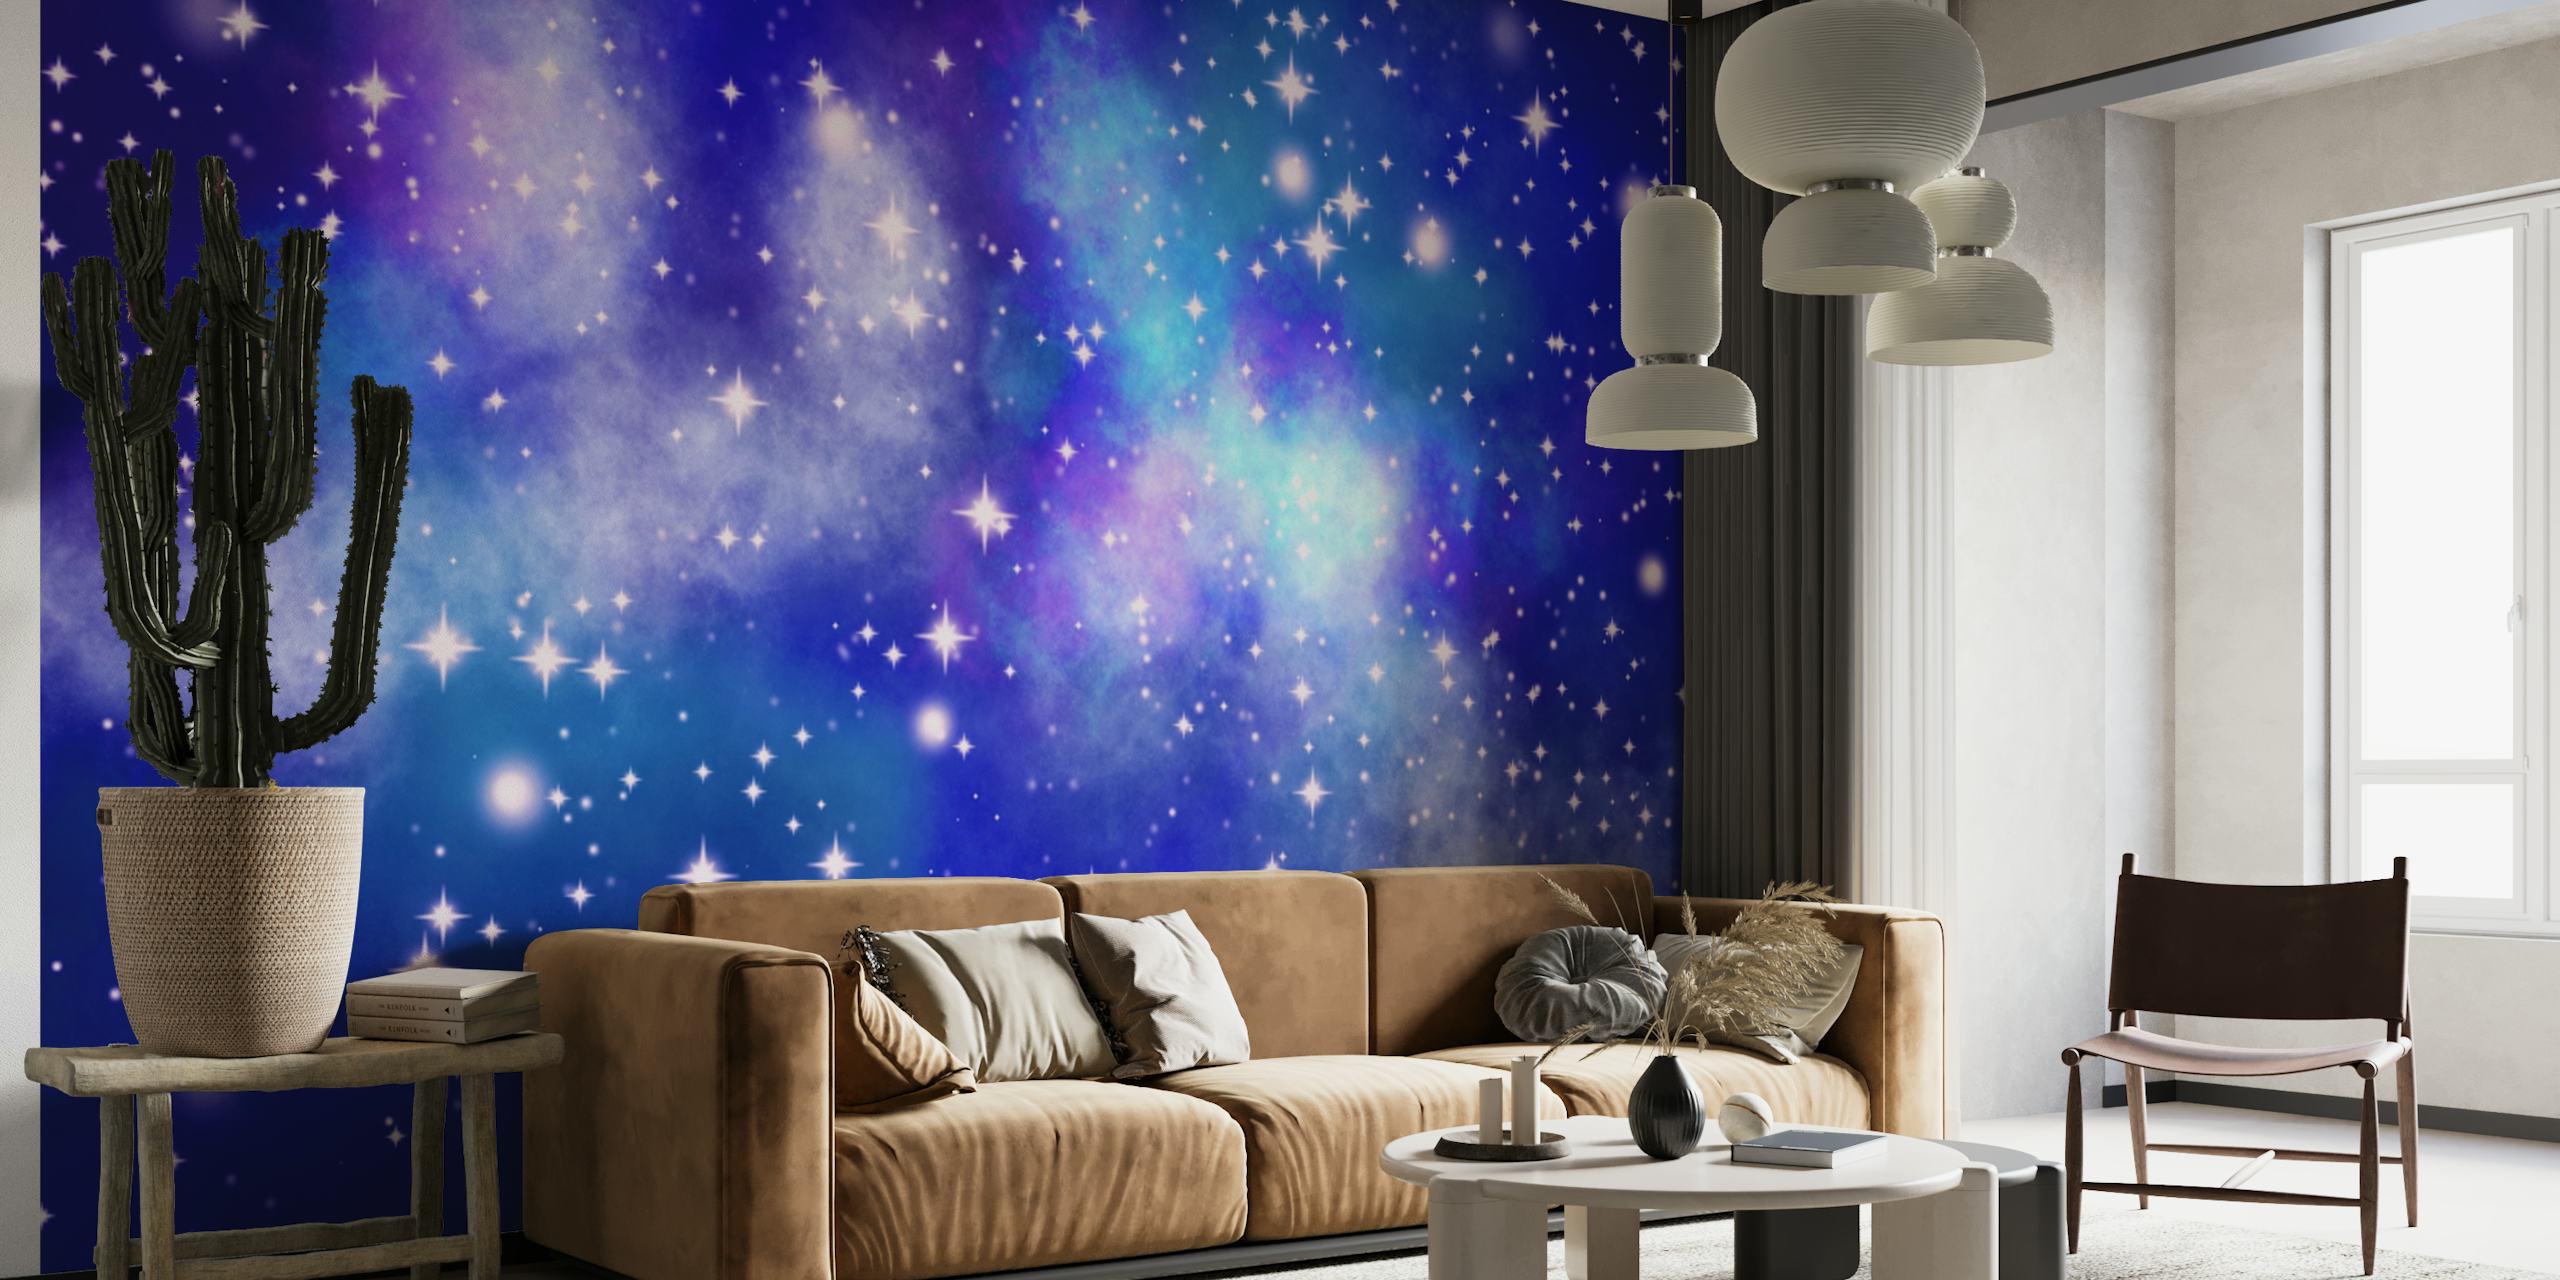 Starry night sky with various shades of blue and twinkling stars representing a galaxy view wall mural